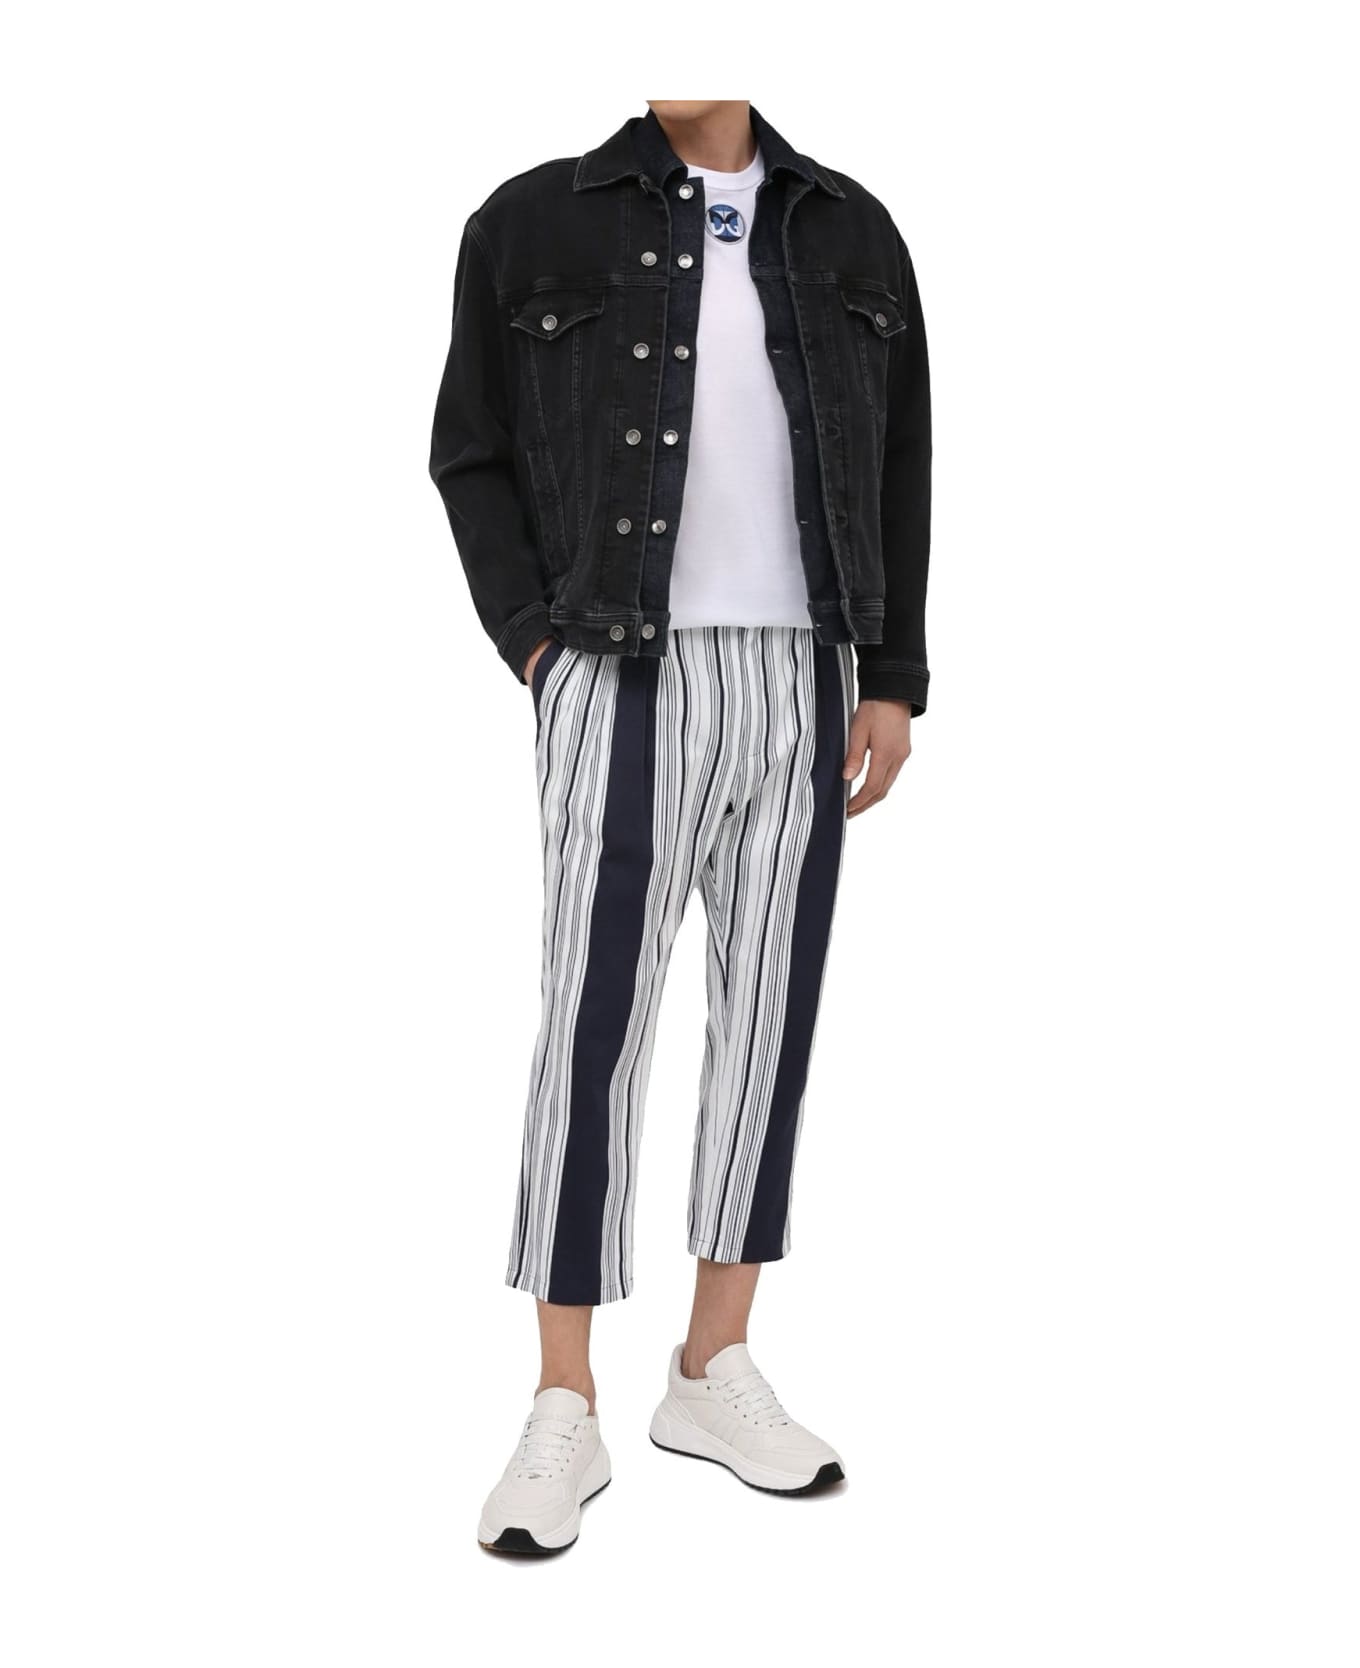 Dolce & Gabbana Cotton Trousers - Blue ボトムス